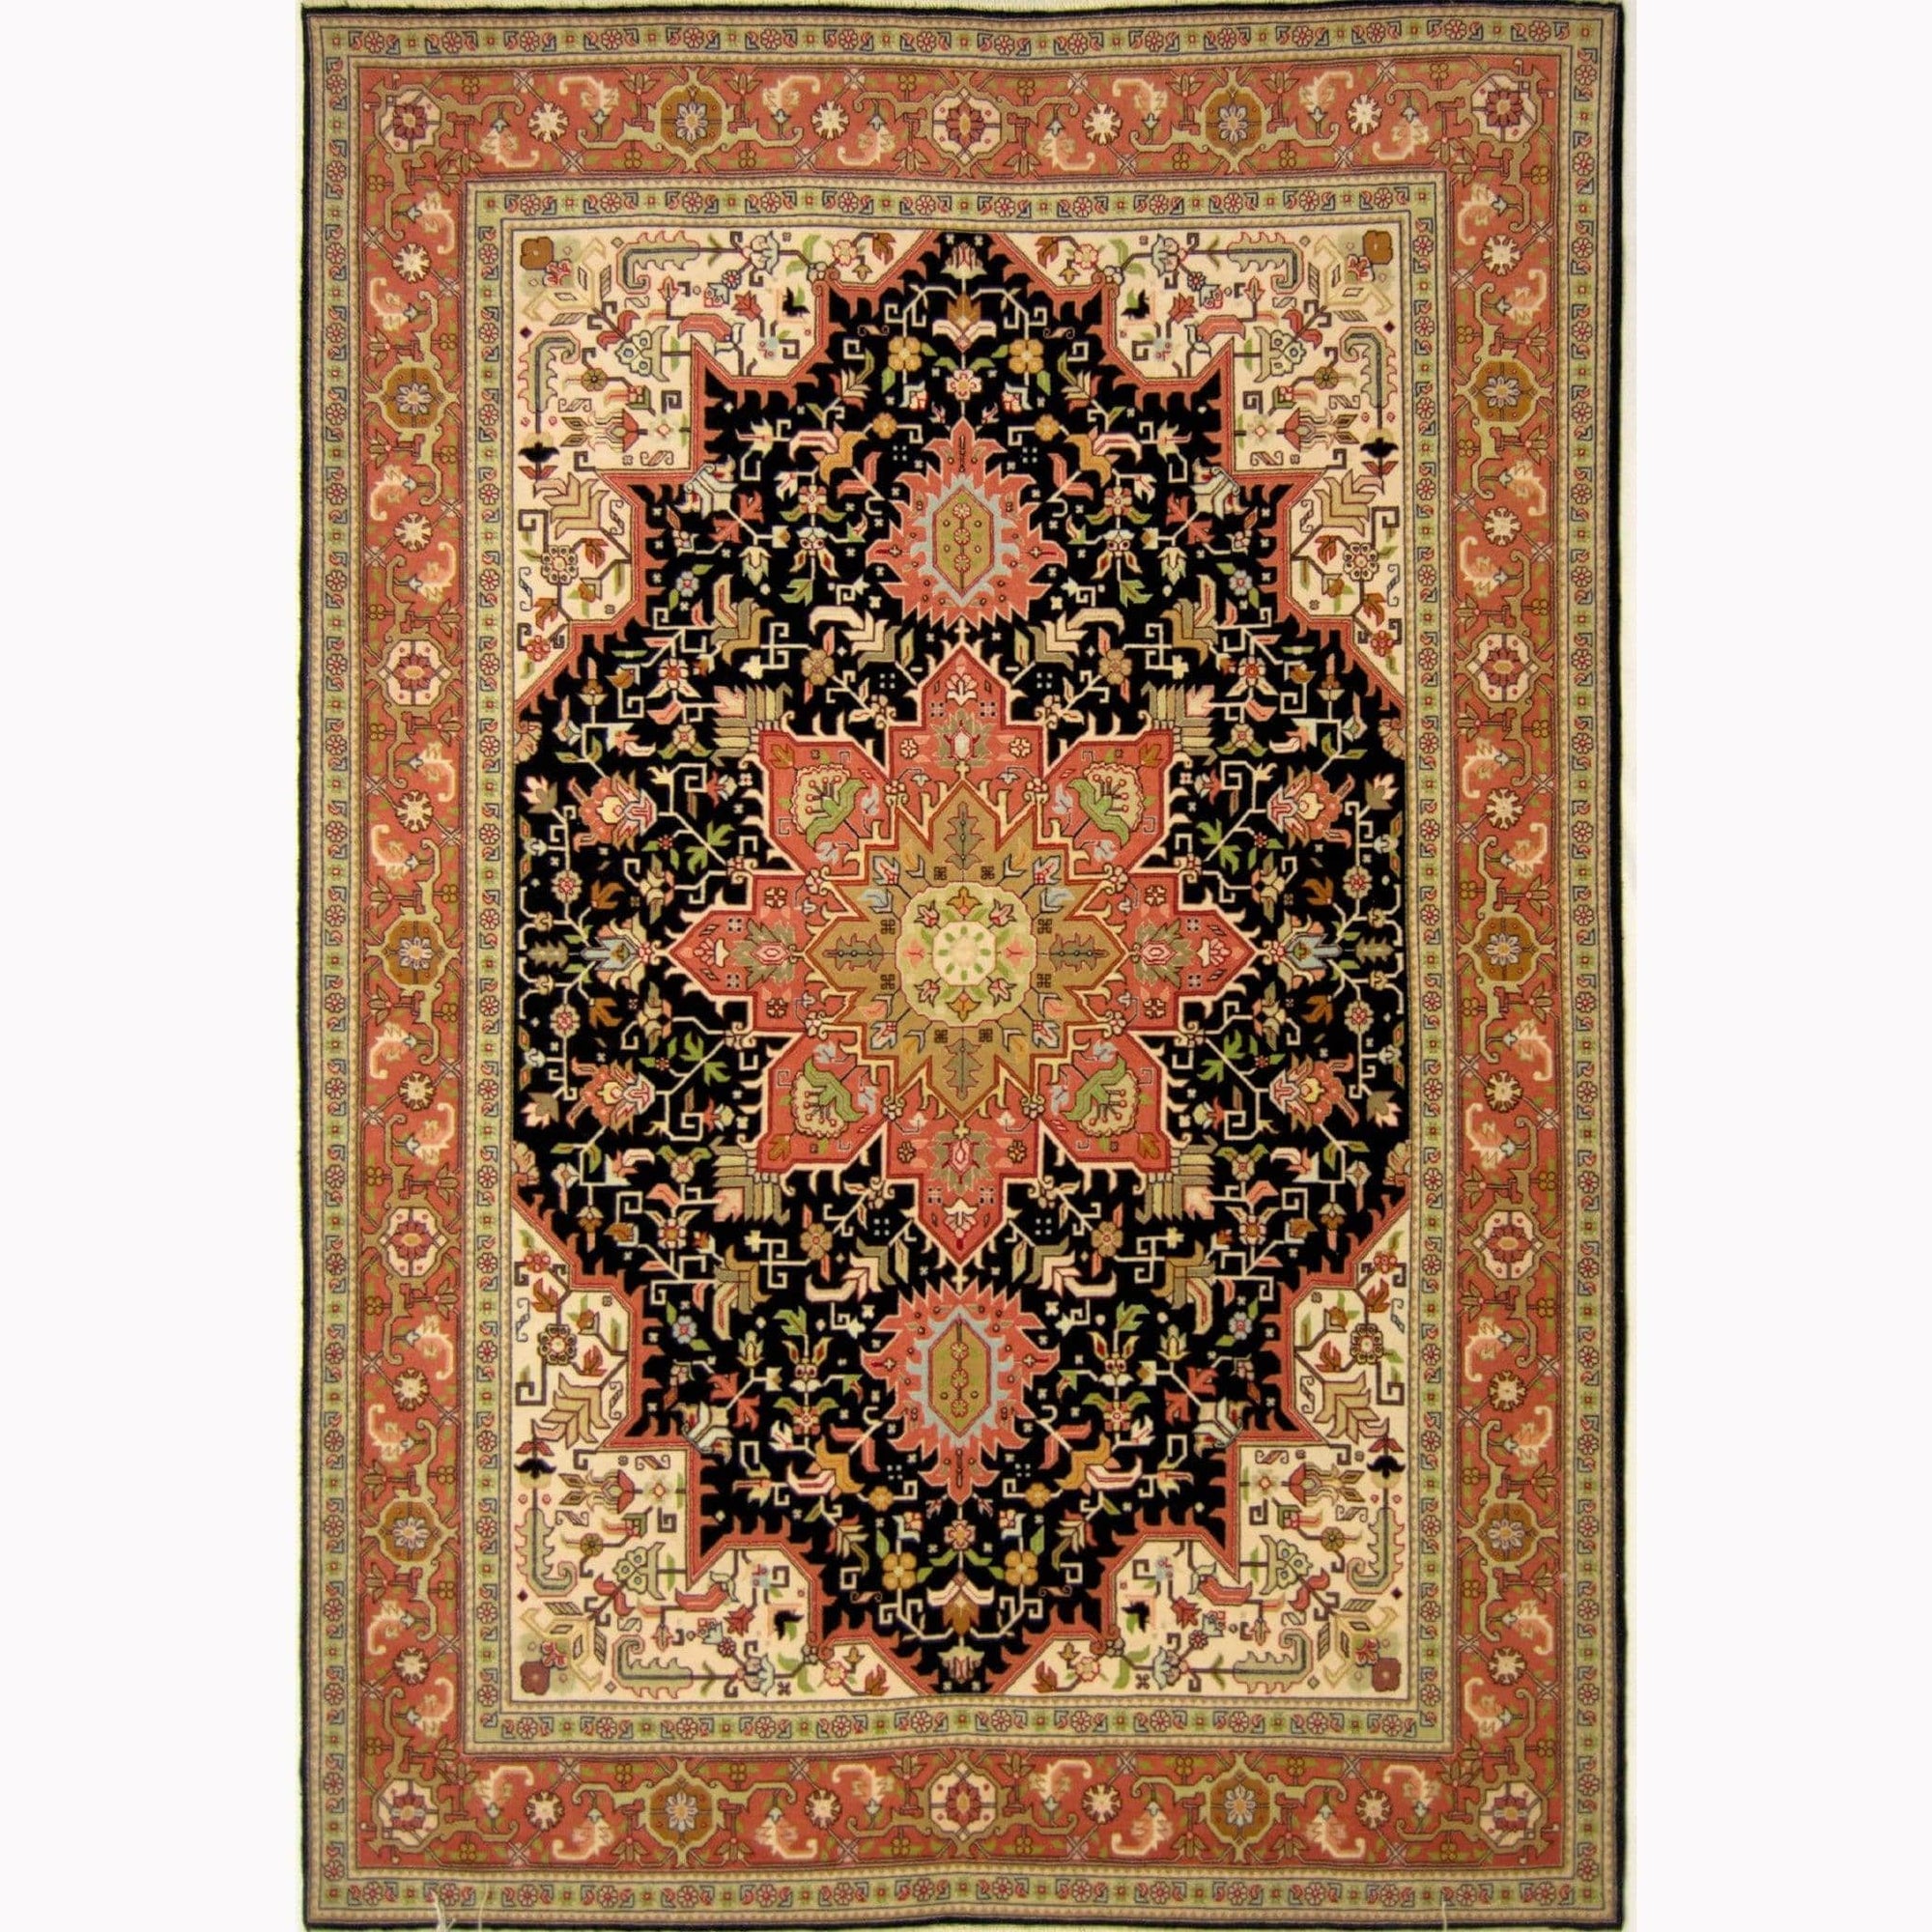 Super Fine Hand-knotted Persian Wool and Silk Tabriz Rug 148cm x 210cm